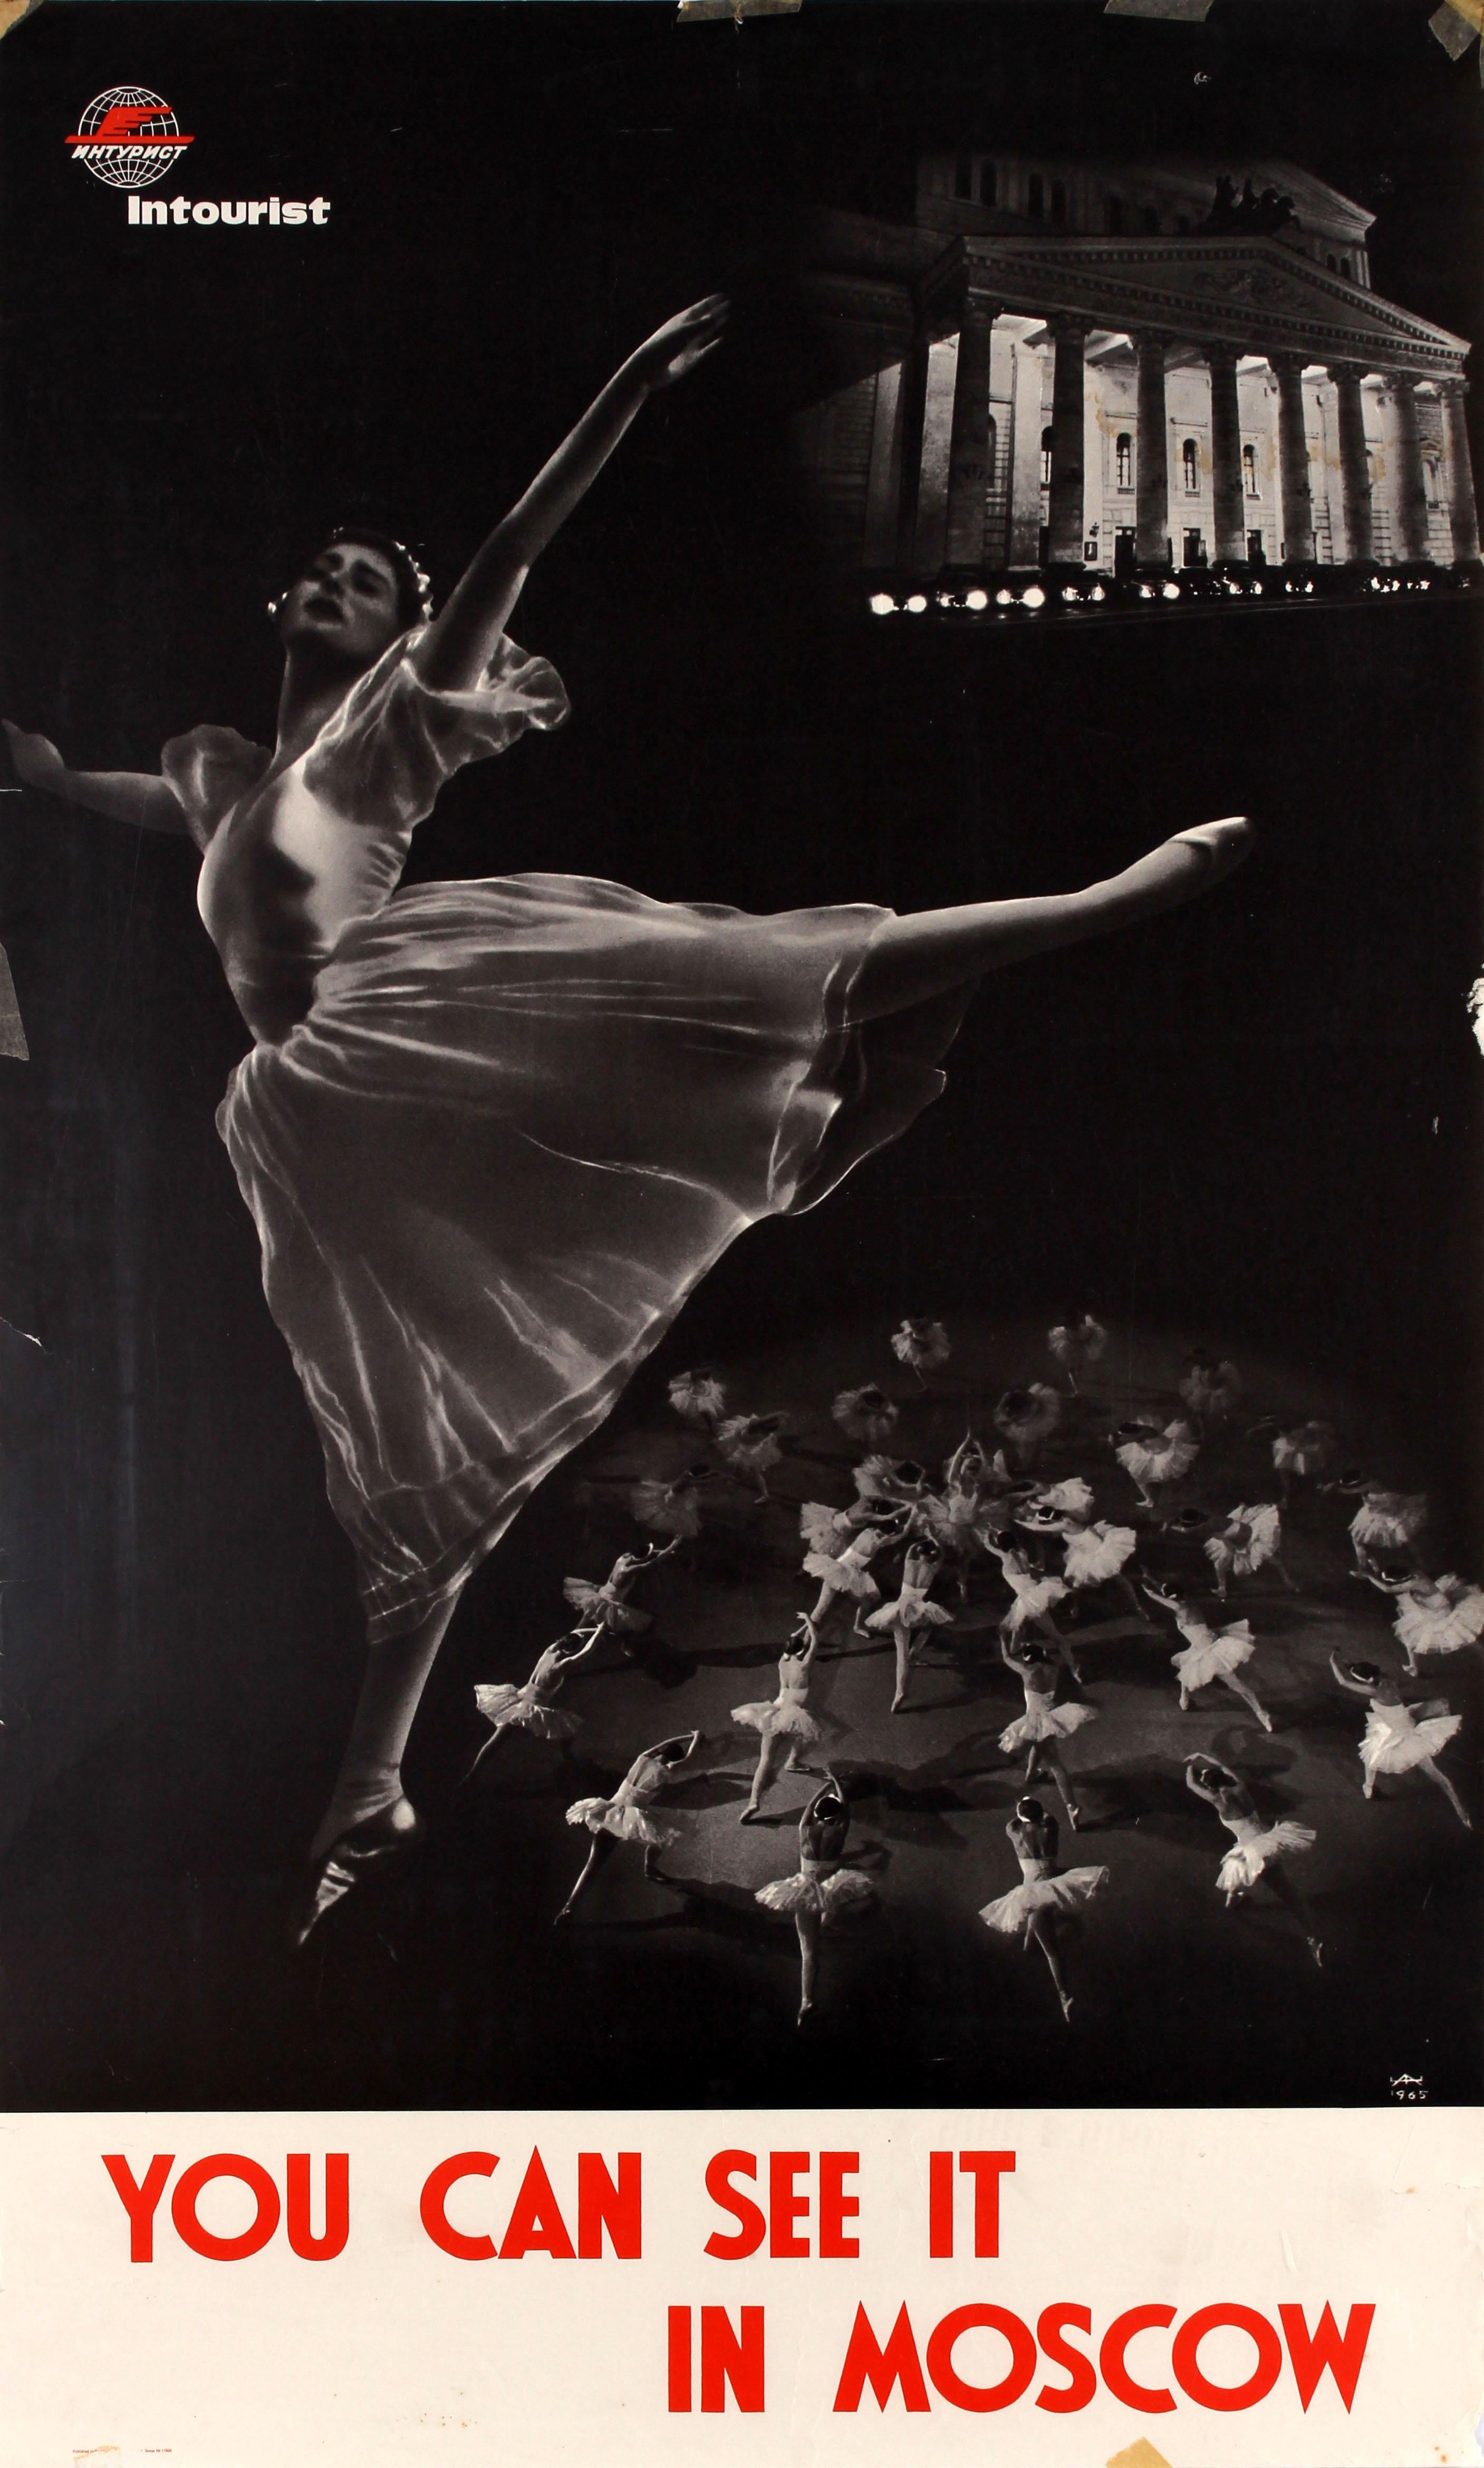 Original vintage Soviet travel poster advertising the Russian Ballet - You Can See it In Moscow - issued by Intourist featuring a black and white photo of a ballet dancer above a stage with more dancers and a photo of the Bolshoi Ballet theatre lit